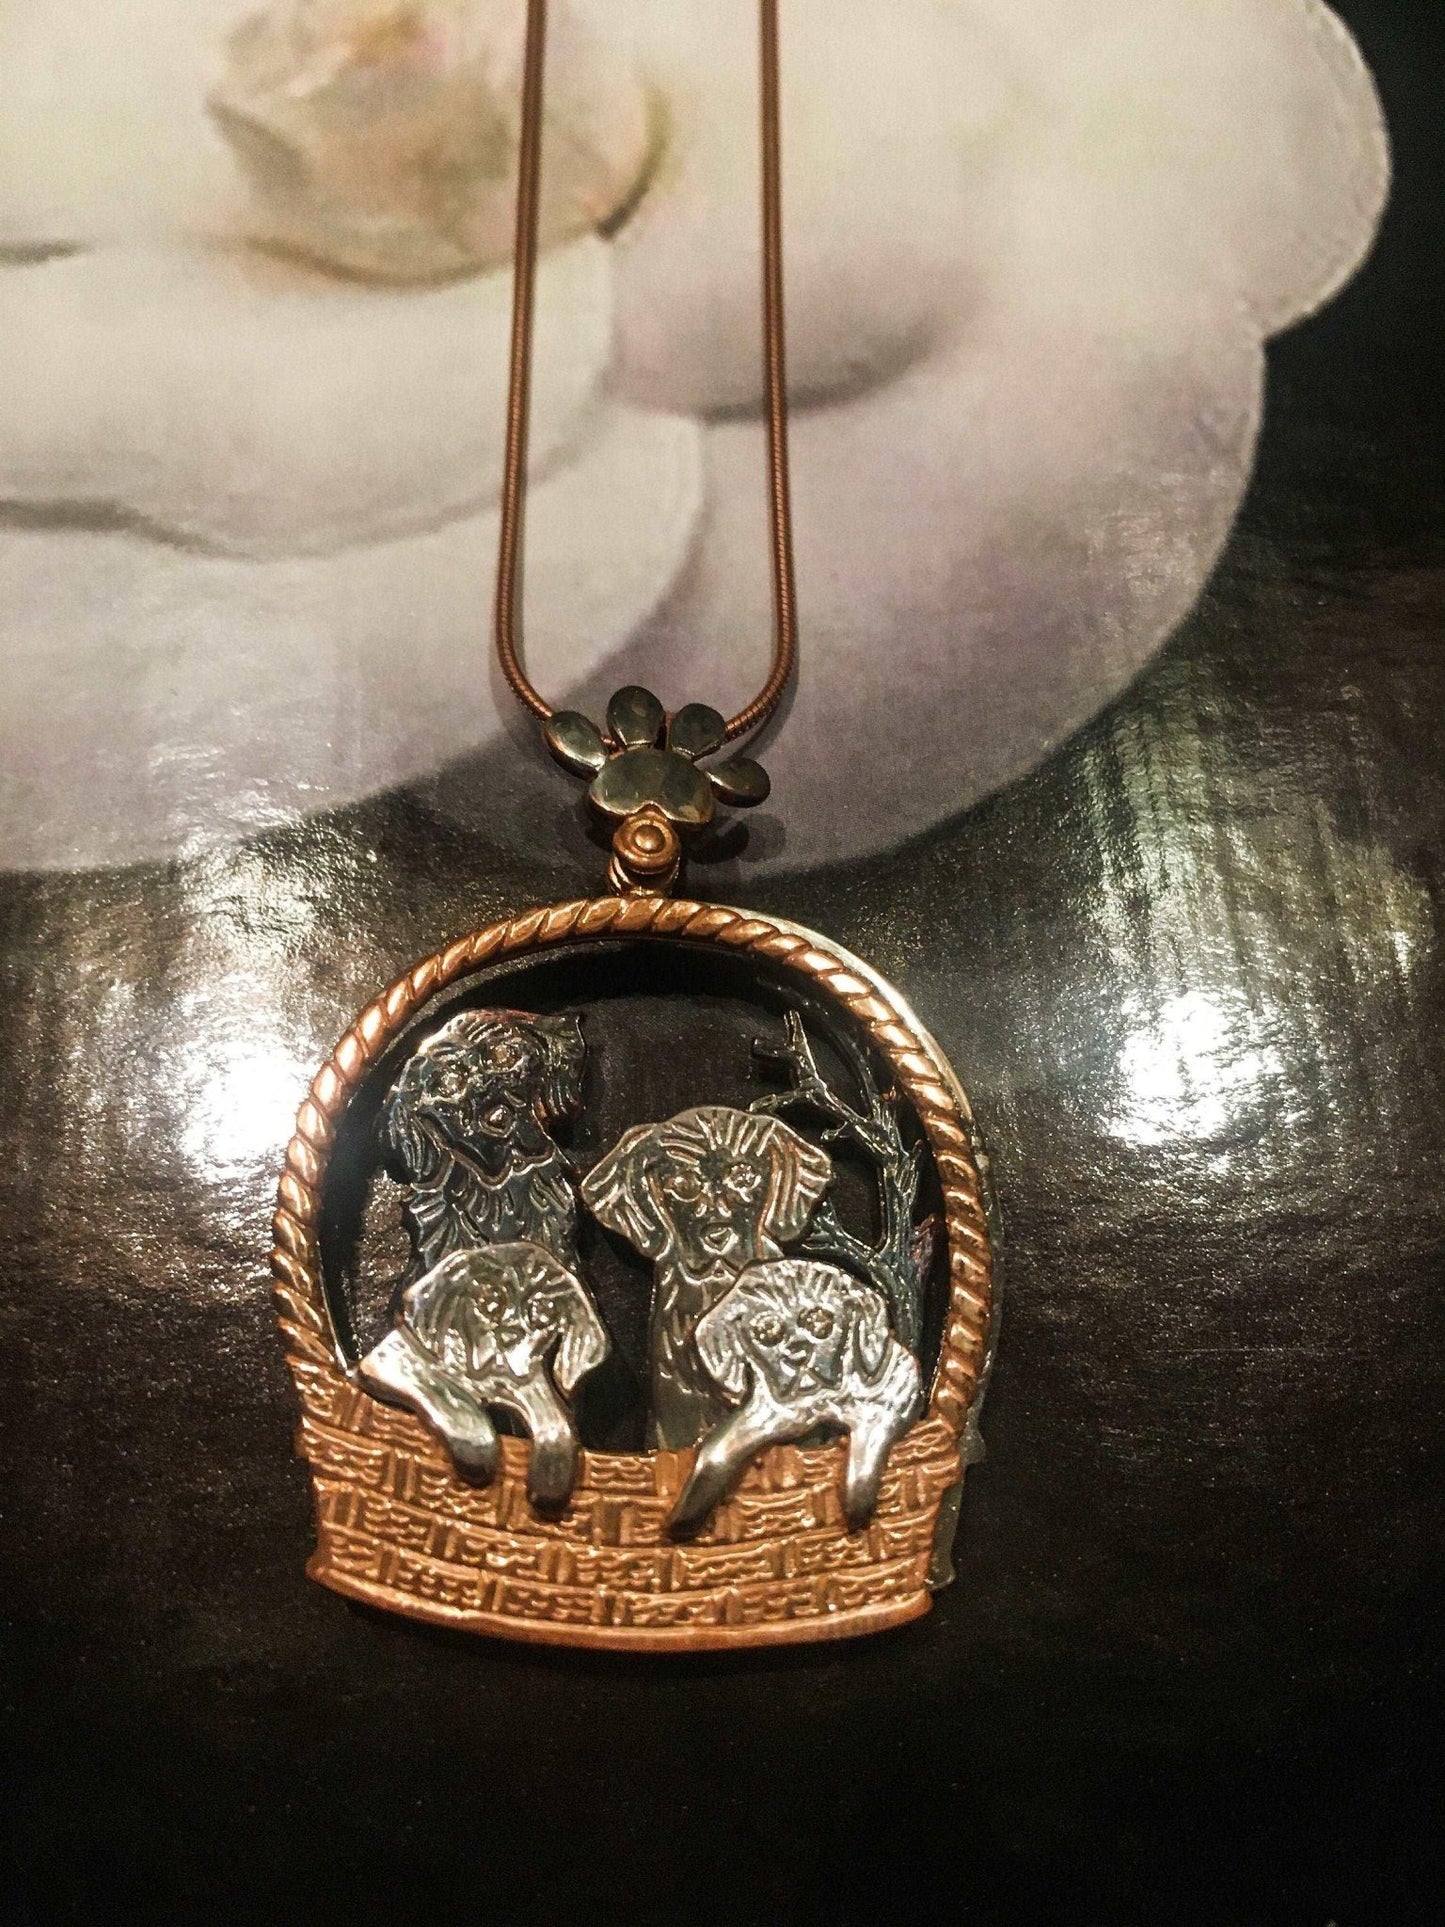 Dog Family Moving Pendant, Dog Jewelry Custom Desing Necklaces, Handmade Dog Jewelry, Animal Gift For Women, Cute Dog Family - Tracesilver